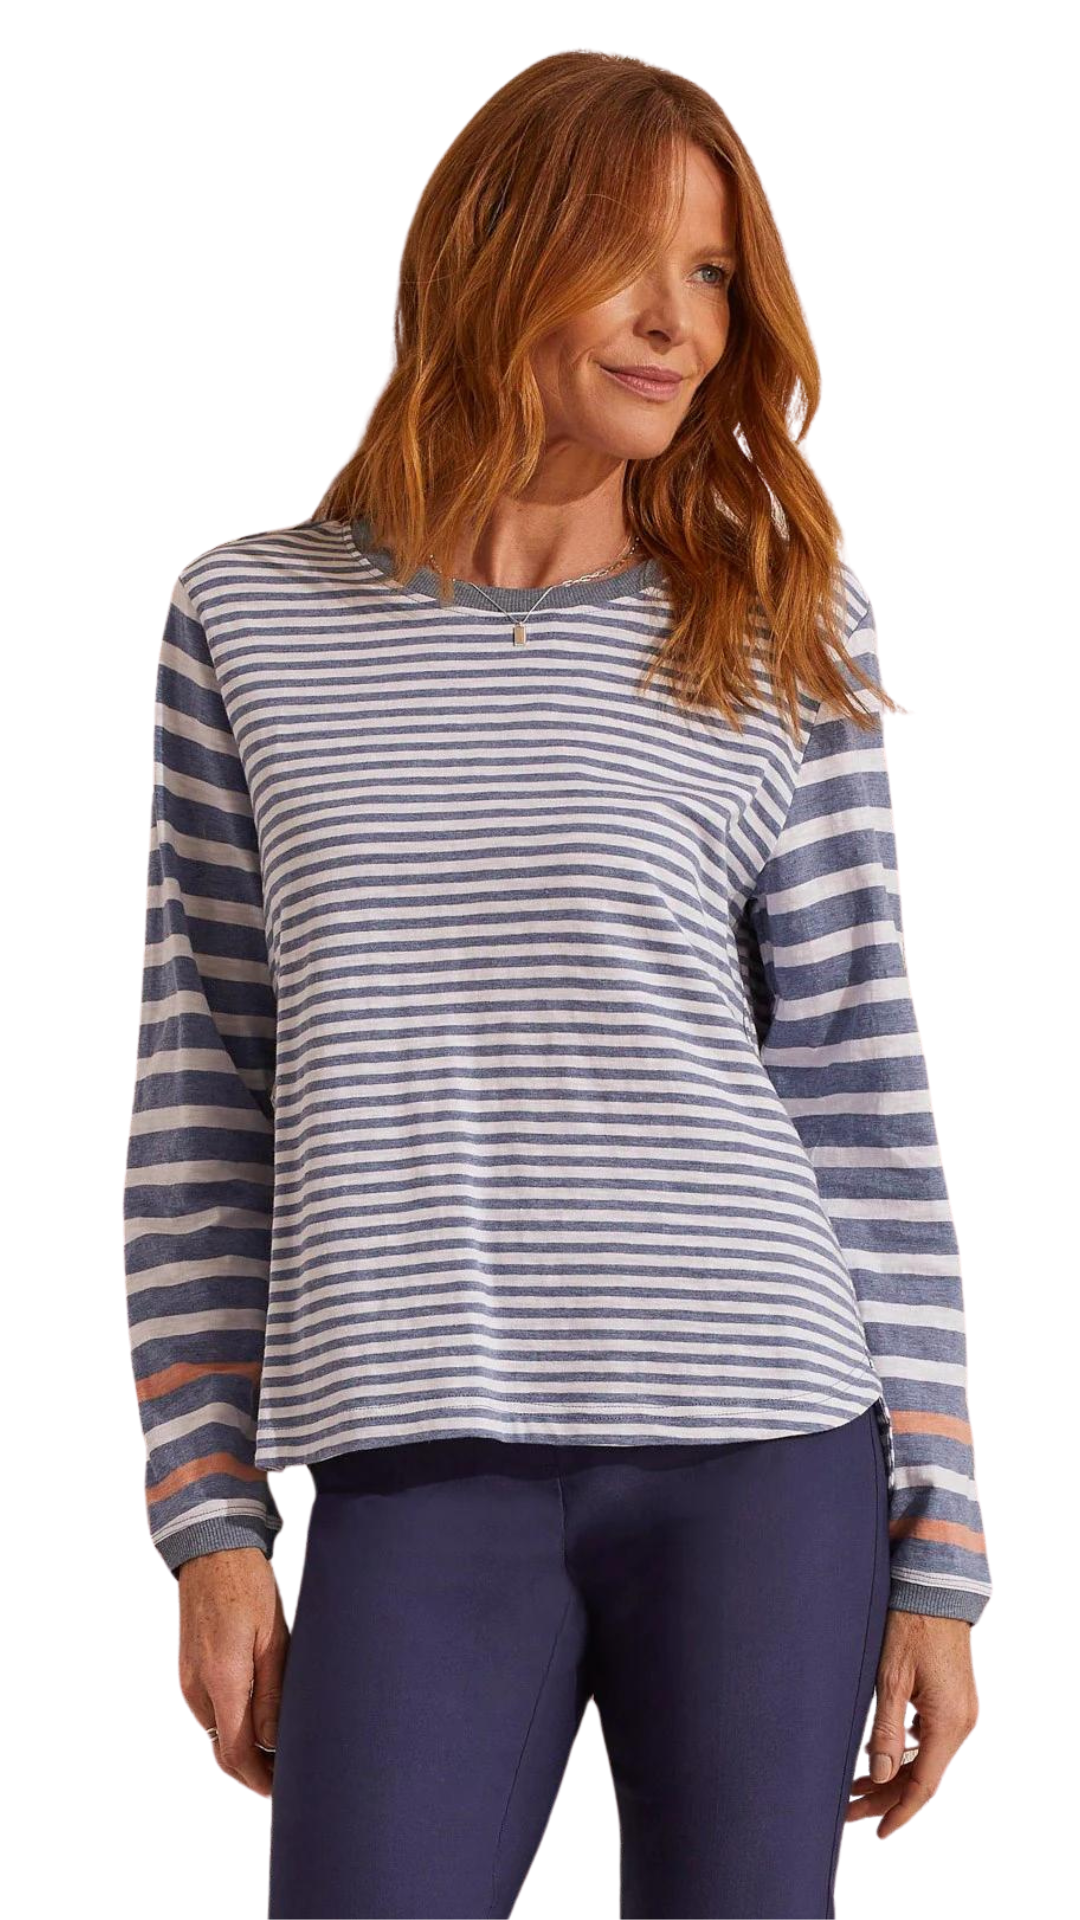 Multi Striped Long Sleeve Top. Style TR1655O-3704